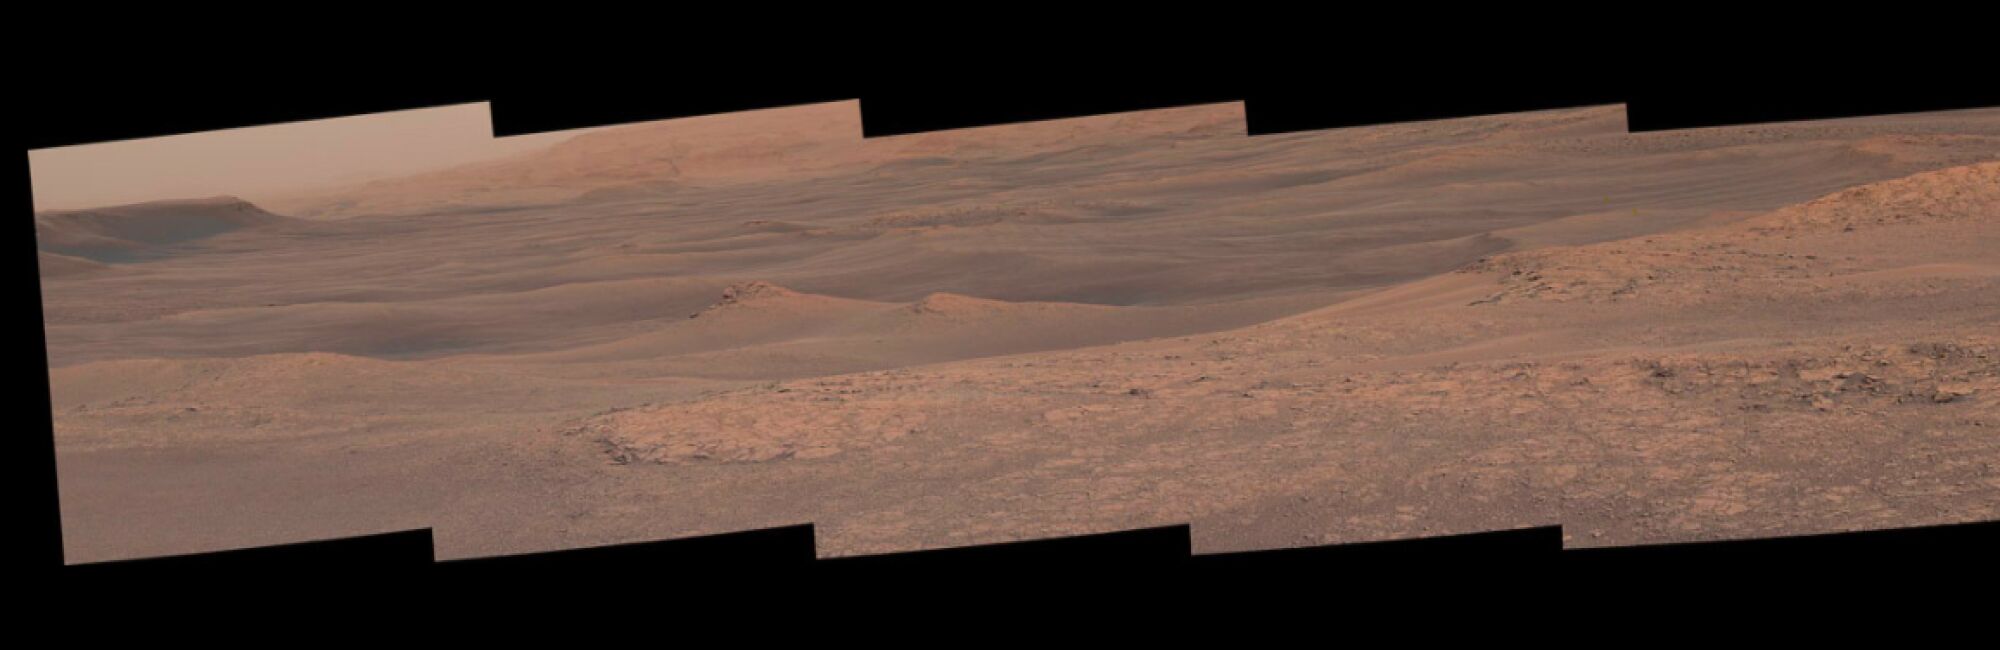 MSSS cameras on rover Curiosity have produced panoramic images of Mar's Gale Crater.